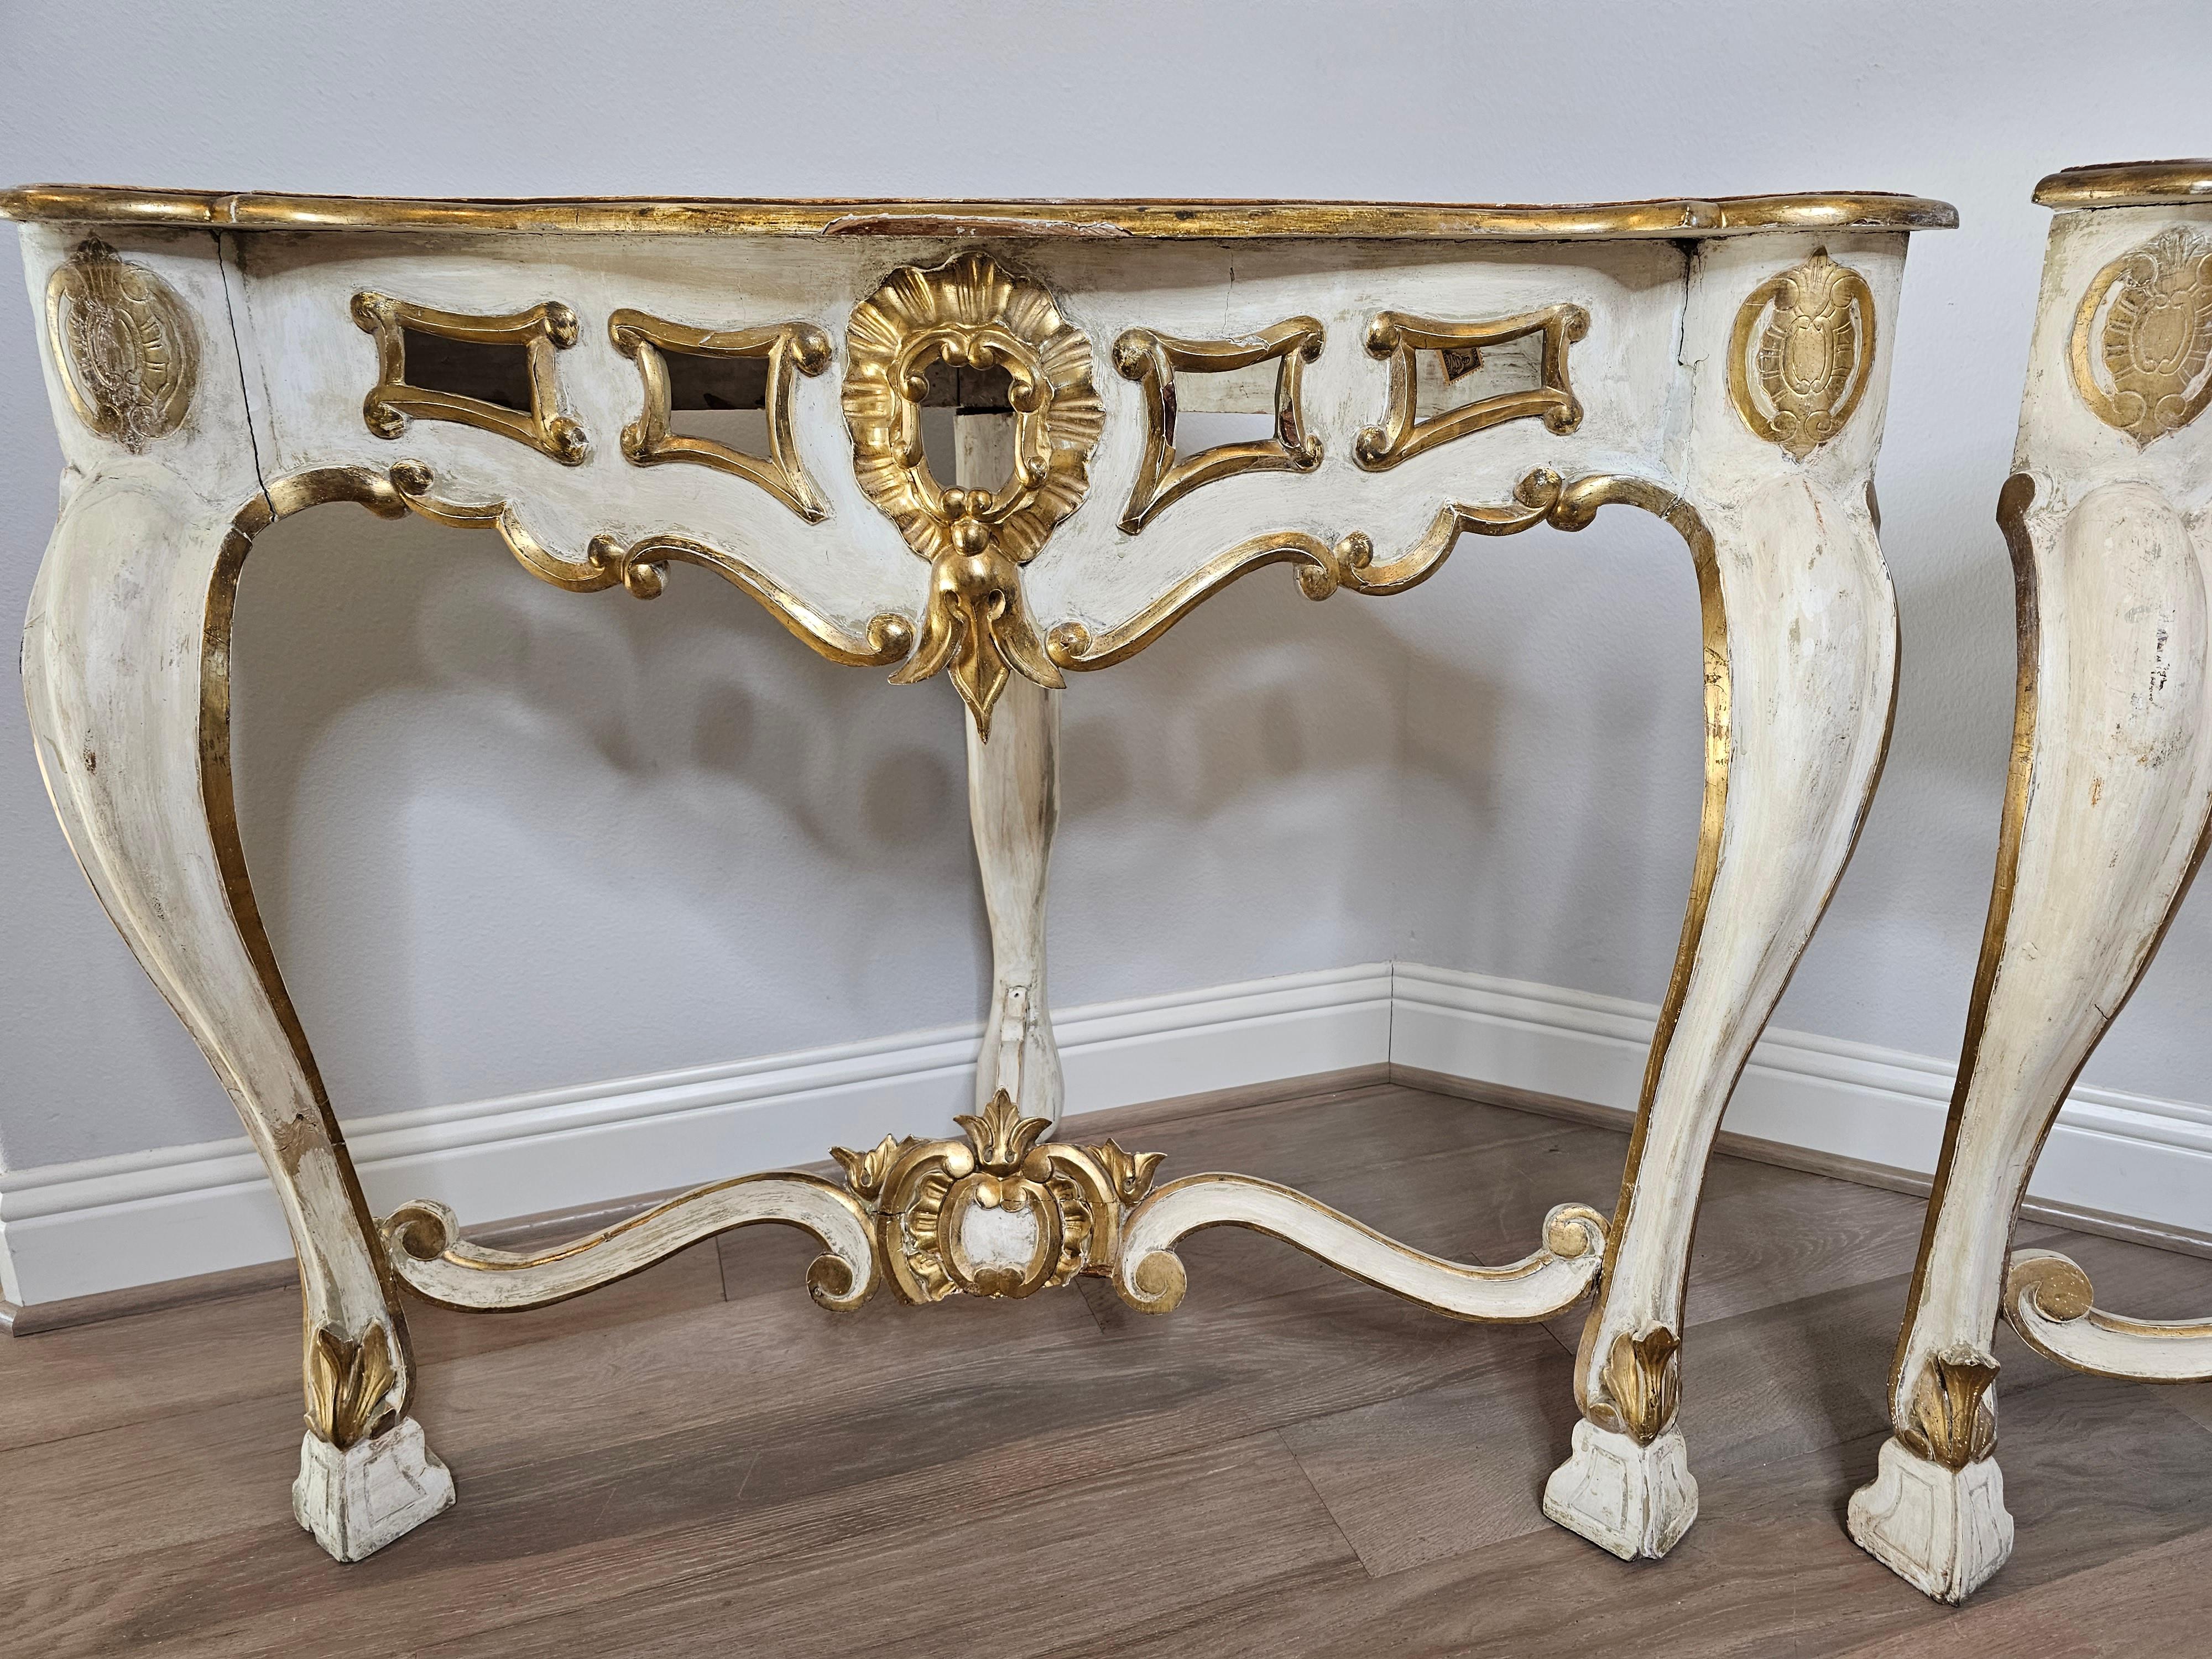 18th Century Italian Louis XV Carved Painted Gilt Wood Corner Console Table Pair For Sale 6